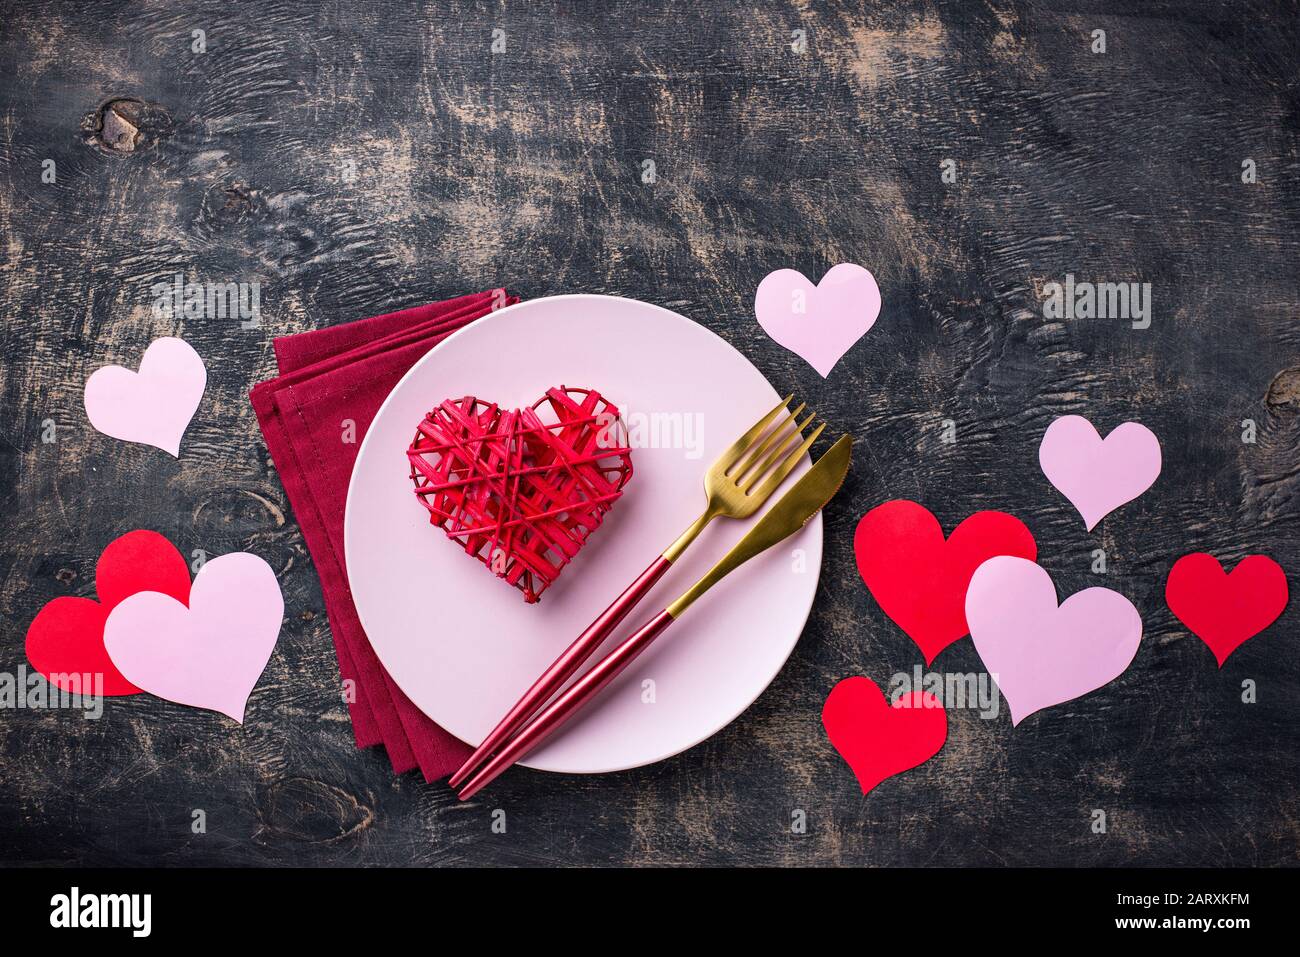 Valentines Day festive table setting Stock Photo